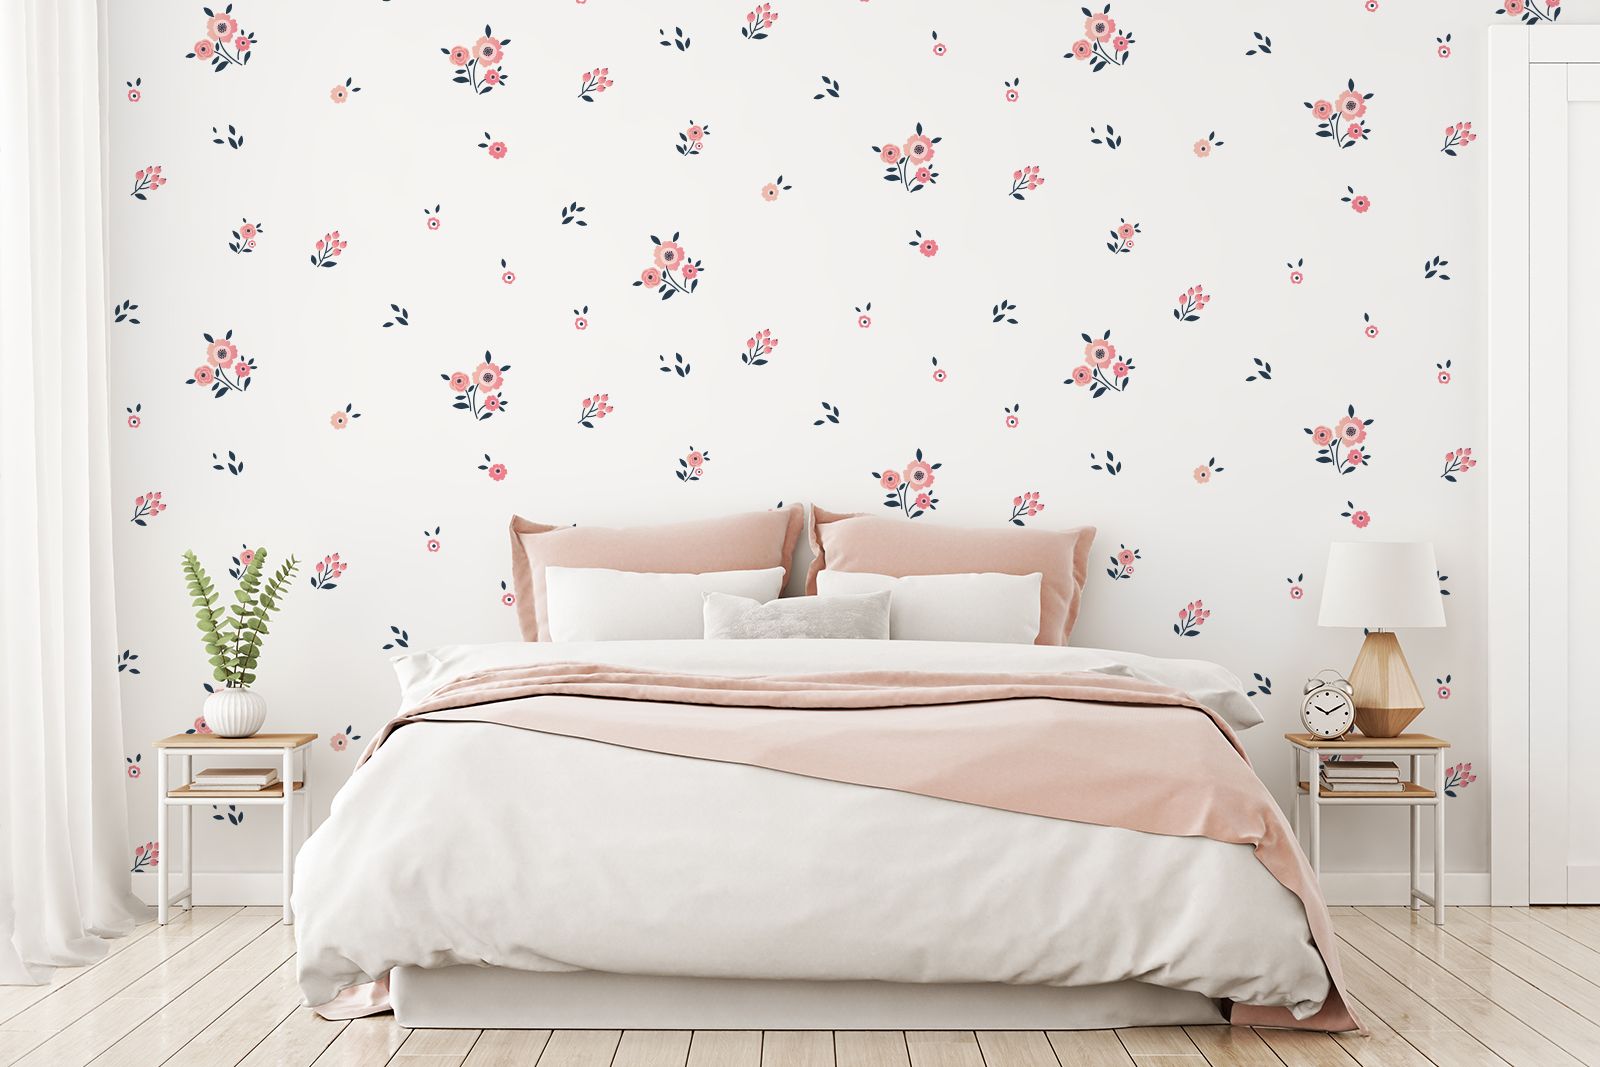 Wild Berries Floral Wall Decals